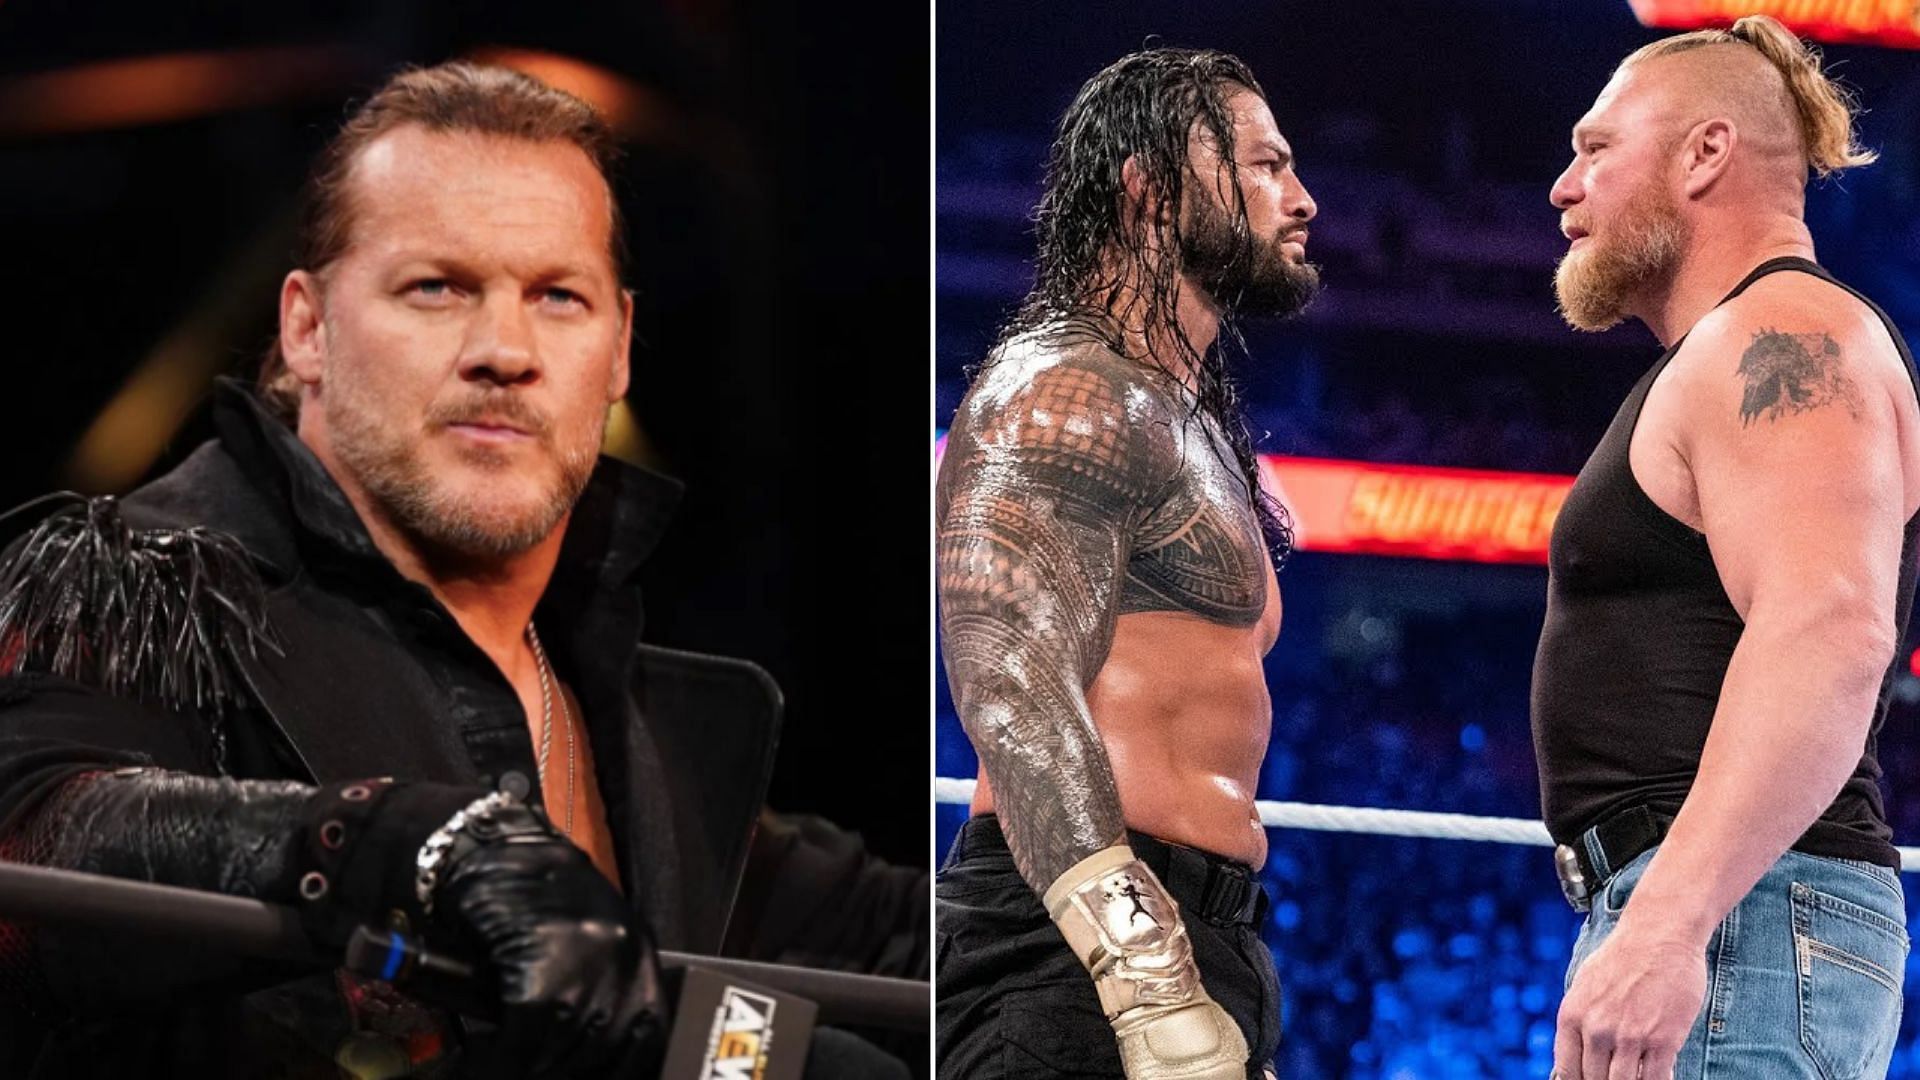 Chris Jericho (left), Brock Lesnar, and Roman Reigns (right)